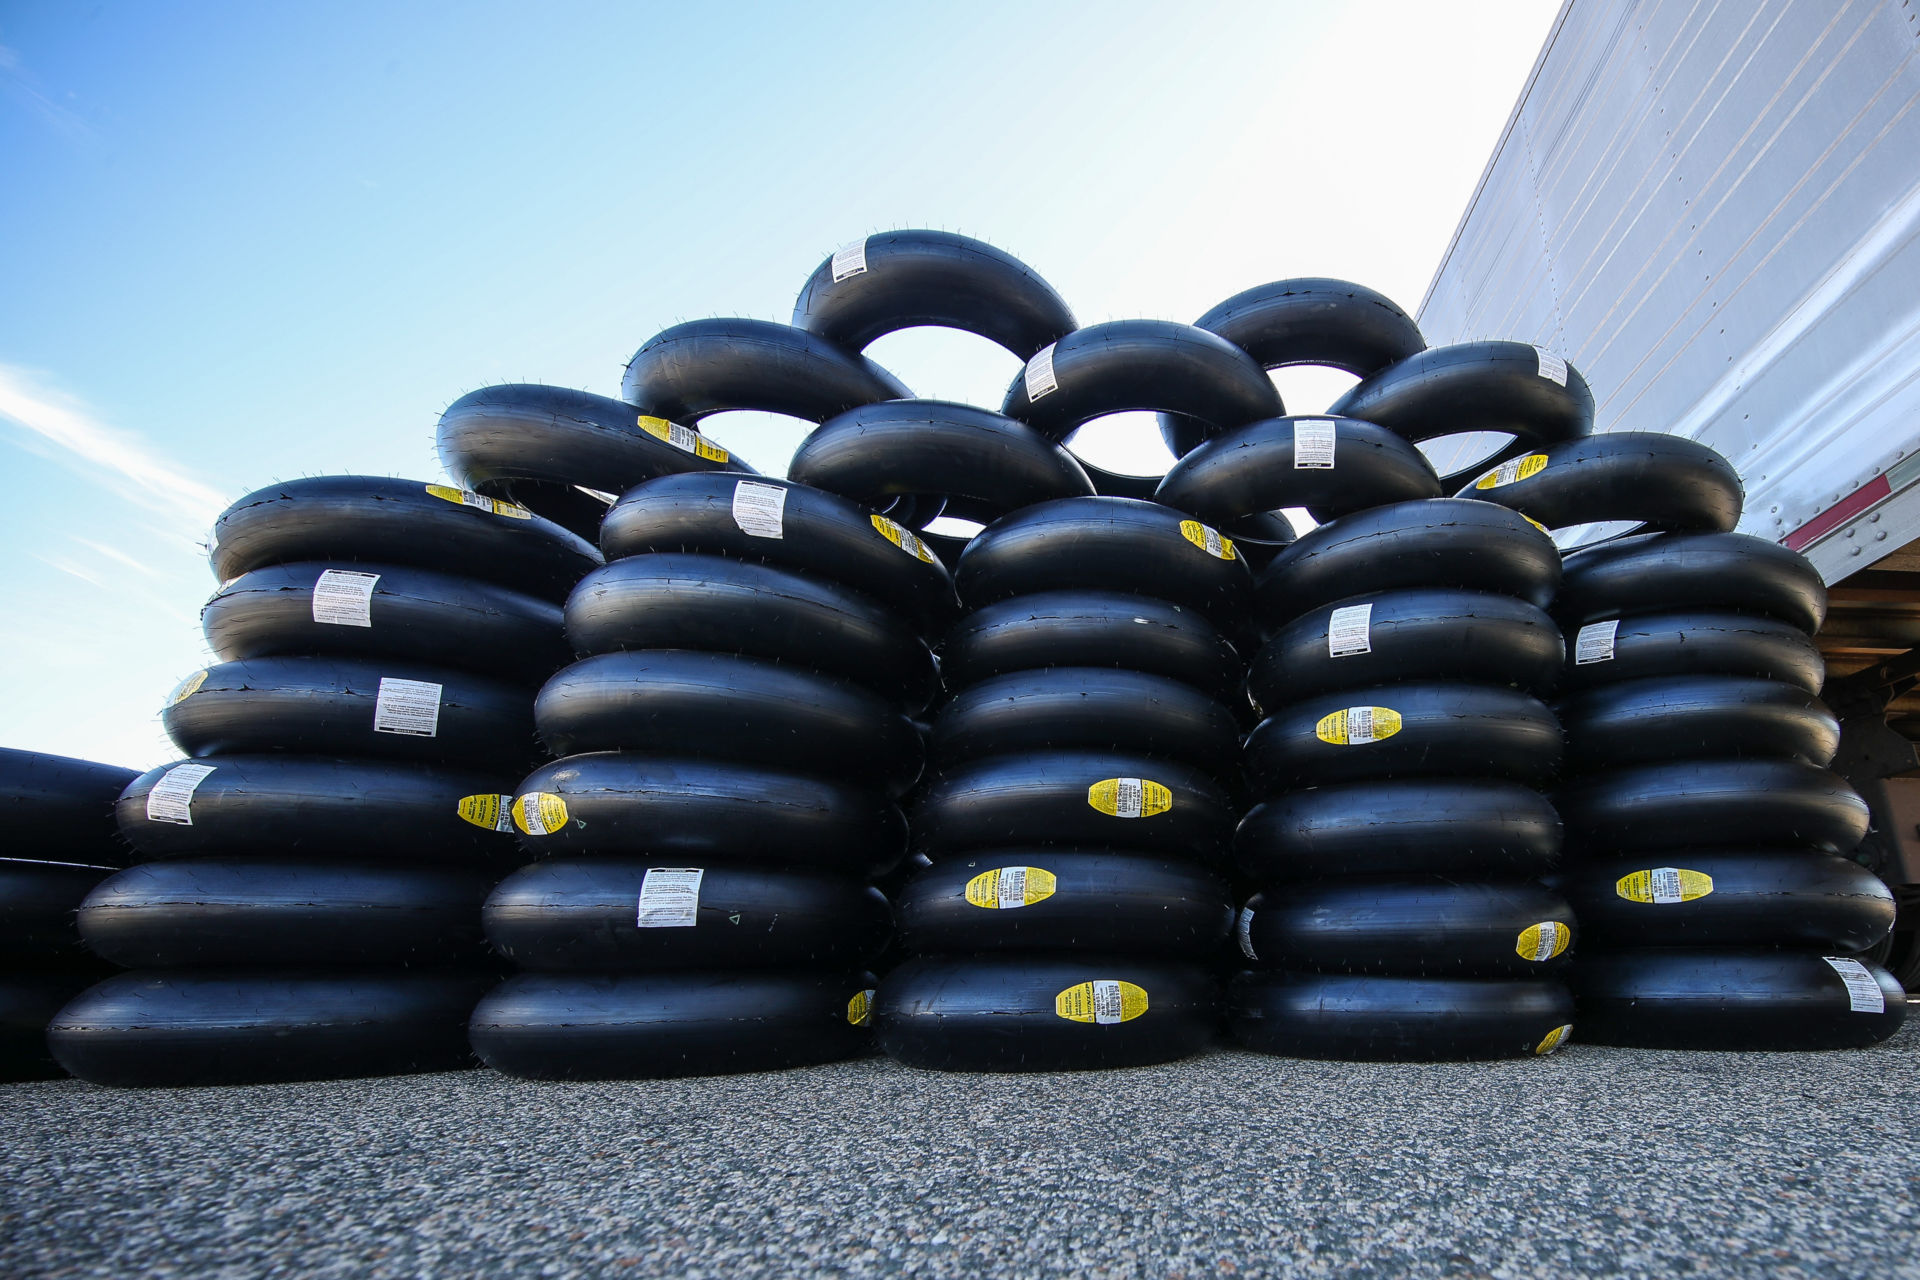 Dunlop is the new exclusive tire supplier for the Superstock class of the FIM Endurance World Championship. Photo by Brian J. Nelson.